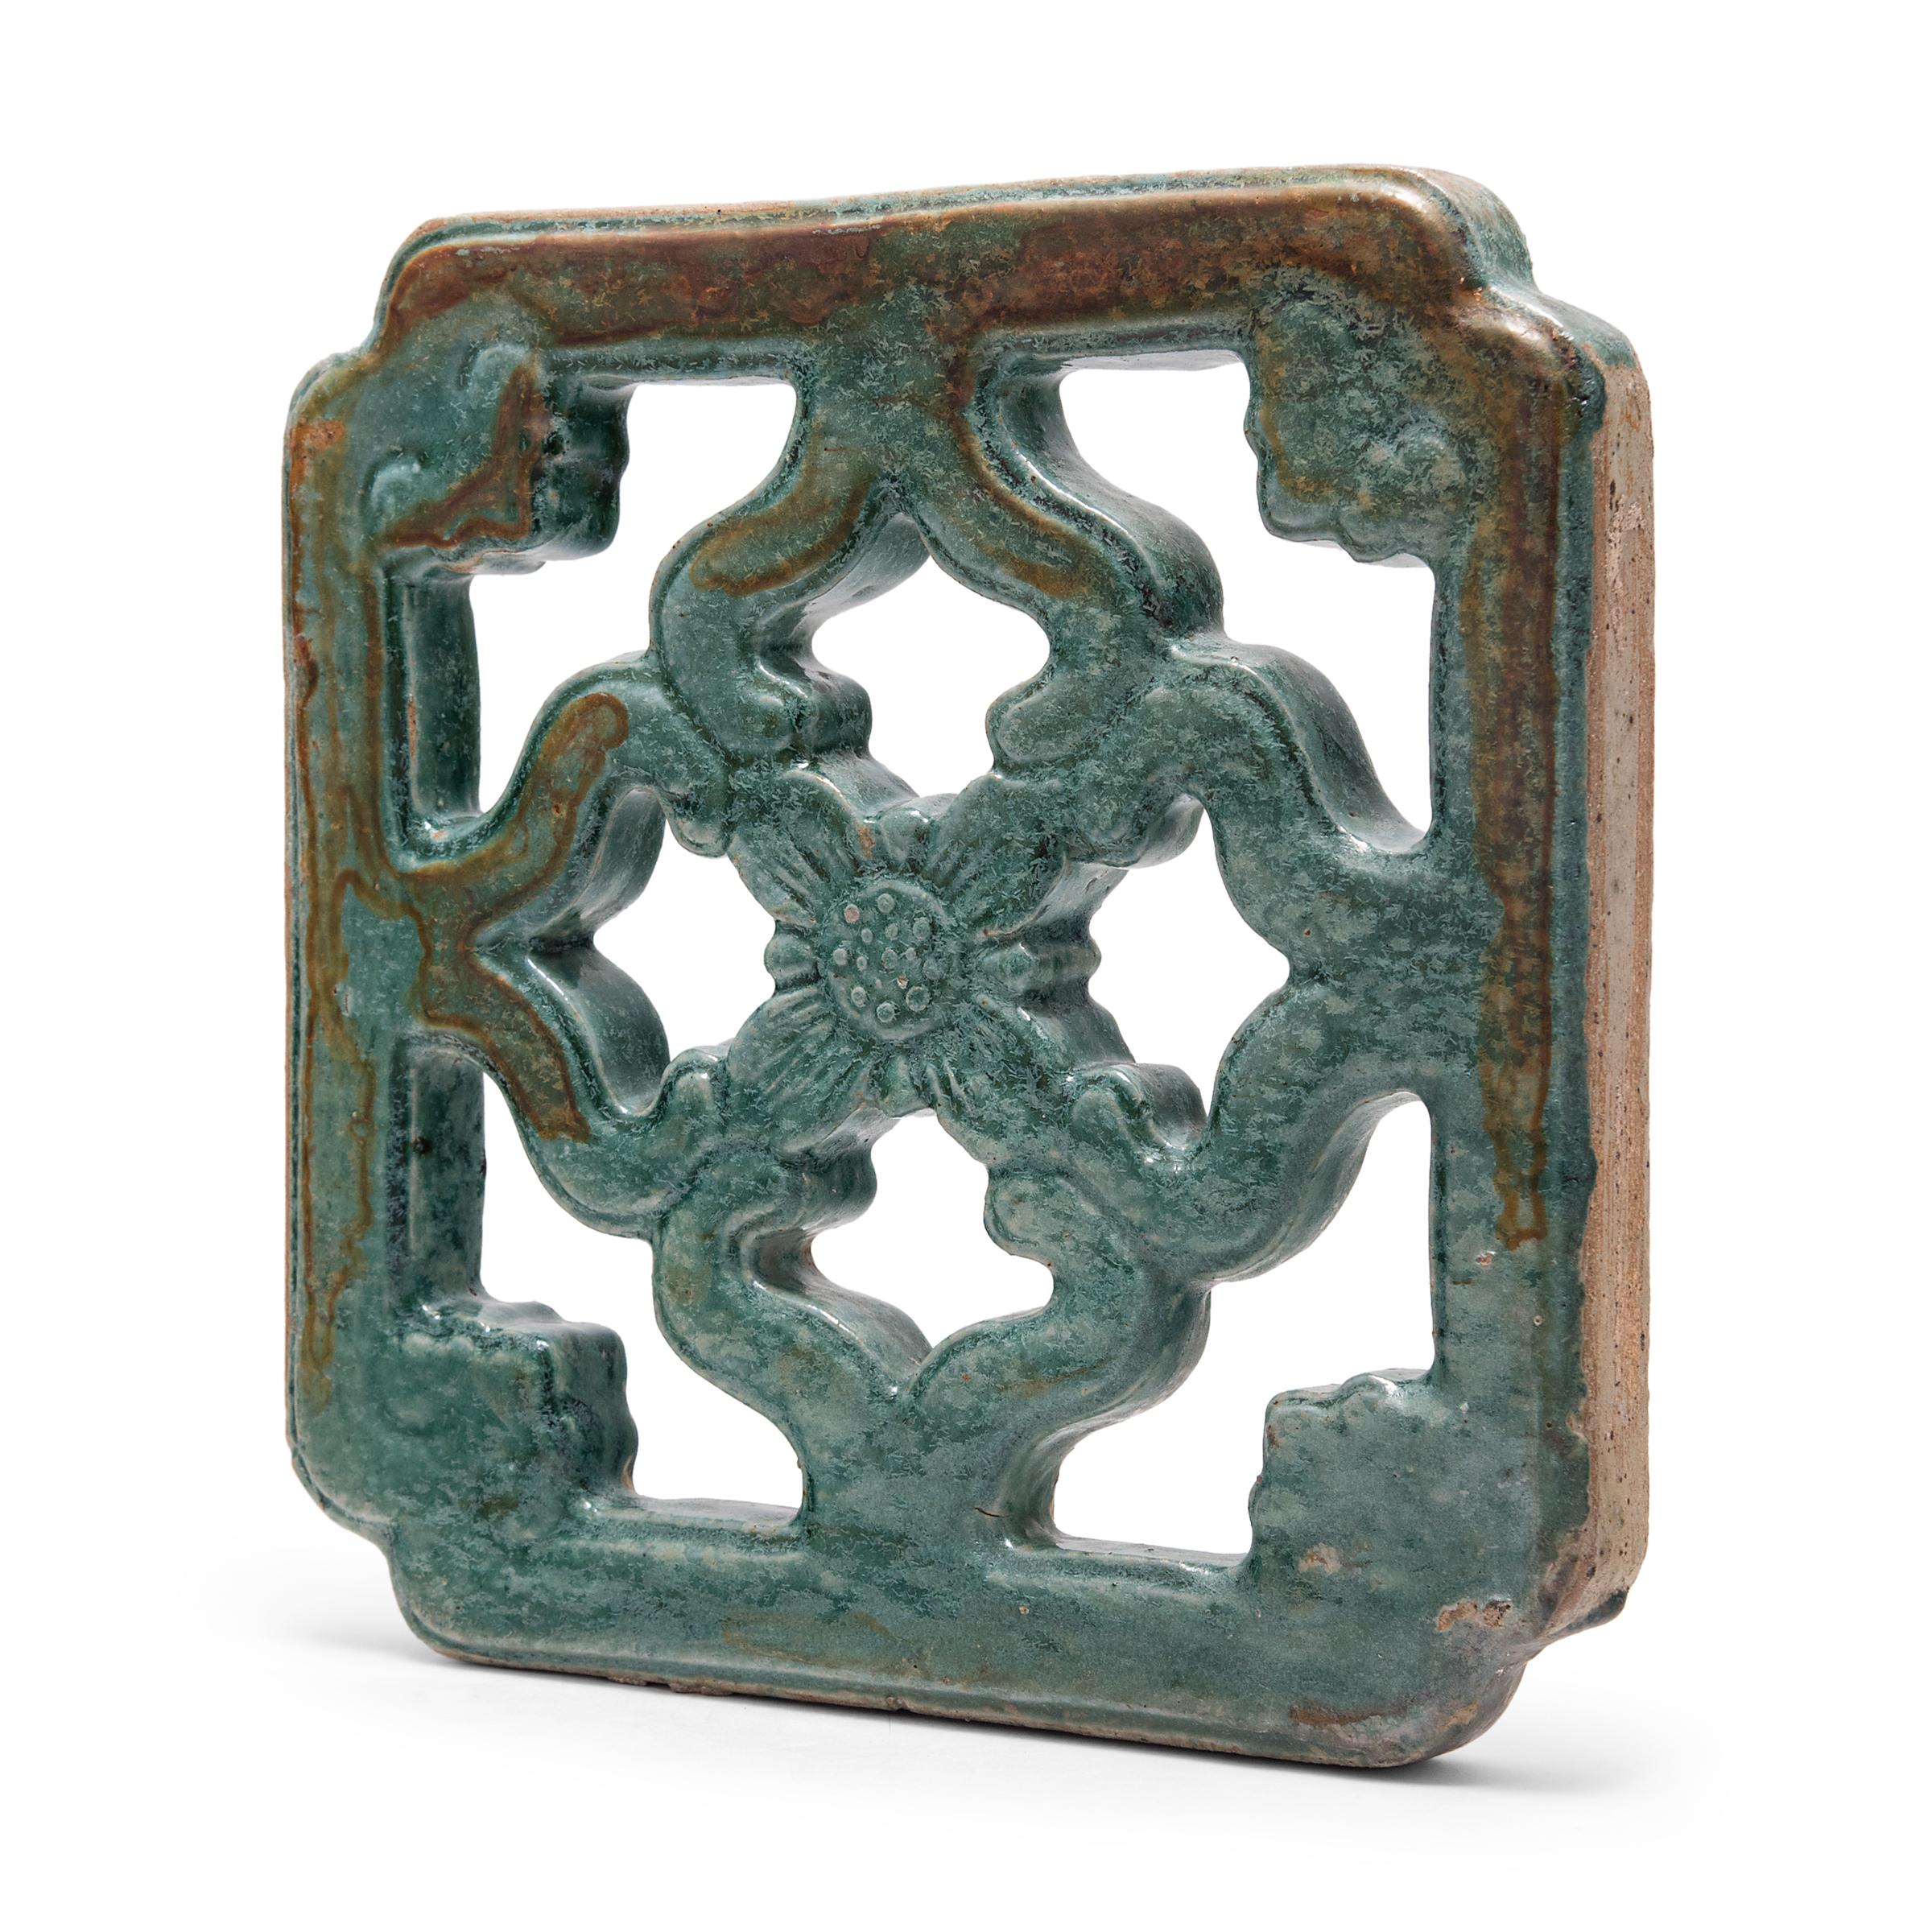 This early 20th century breezeway tile has a simple floral lattice design with cloud-like ruyi symbols at each corner. A beautiful turquoise-green glaze cloaks the exterior, textured by crazing, blisters, and iron leaching for wabi-sabi appeal. Much